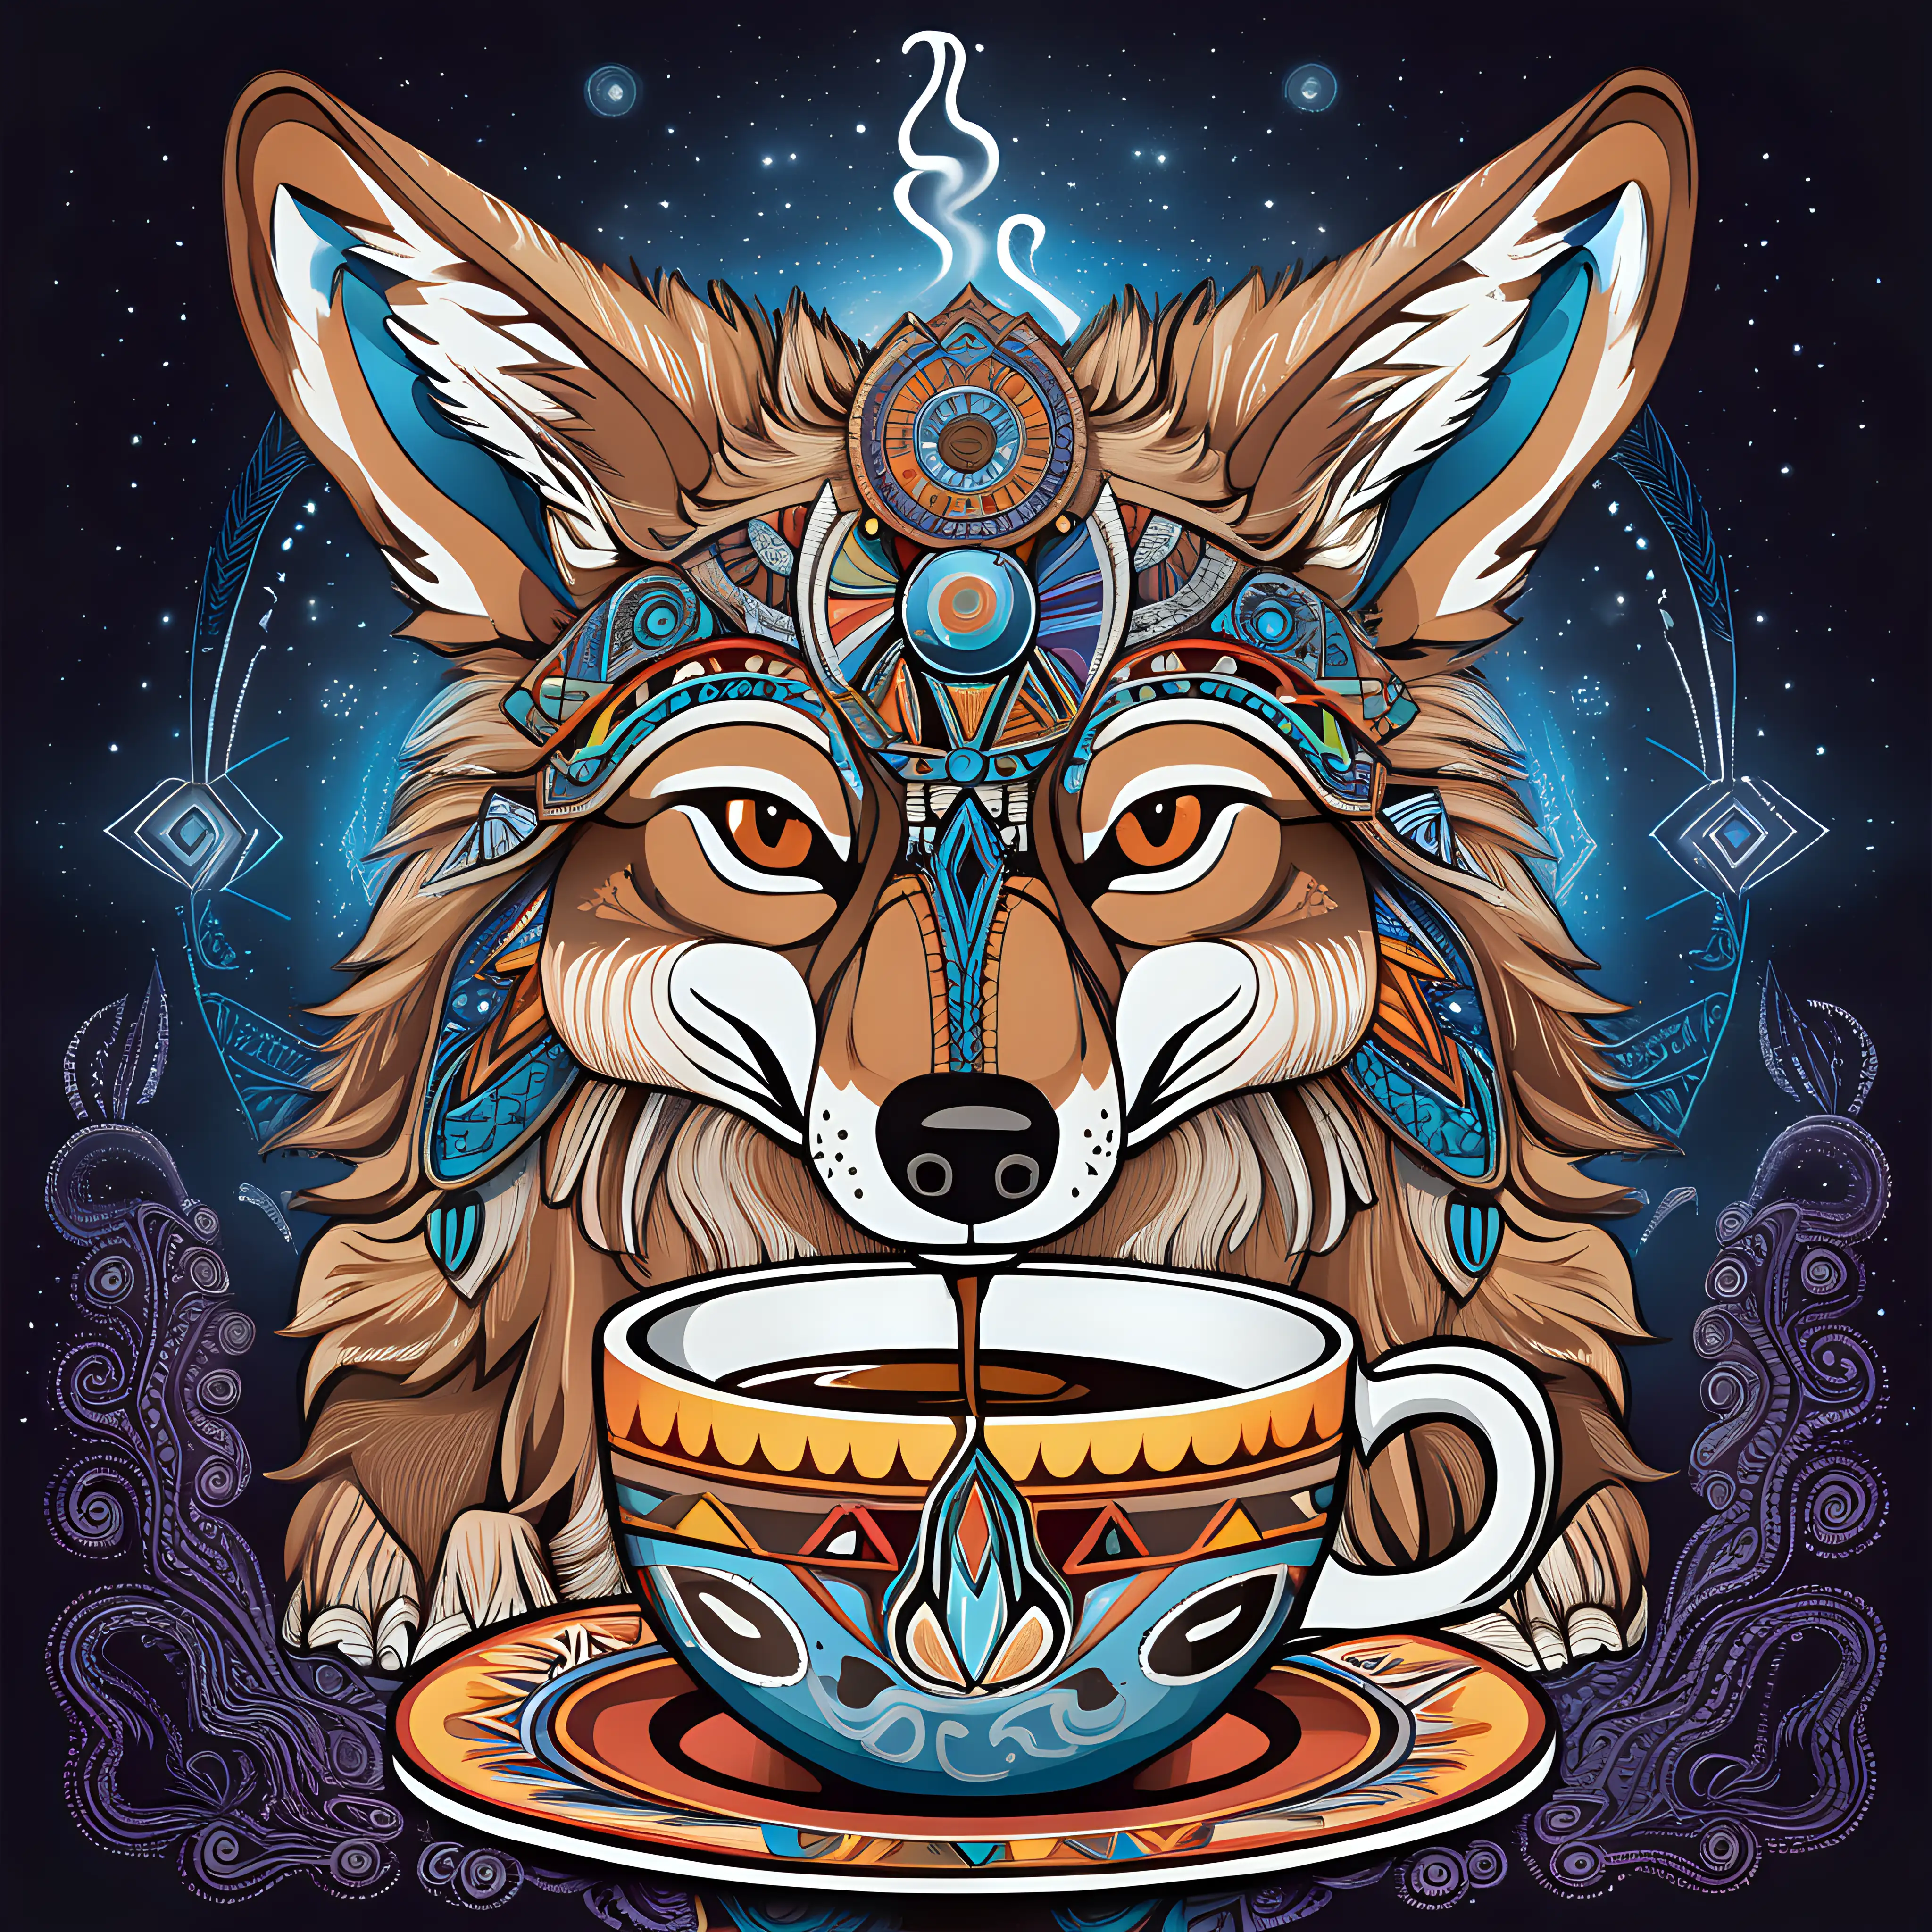 Coyote Enjoying Strong Coffee in Astral Journey Huichol Art Inspired Design